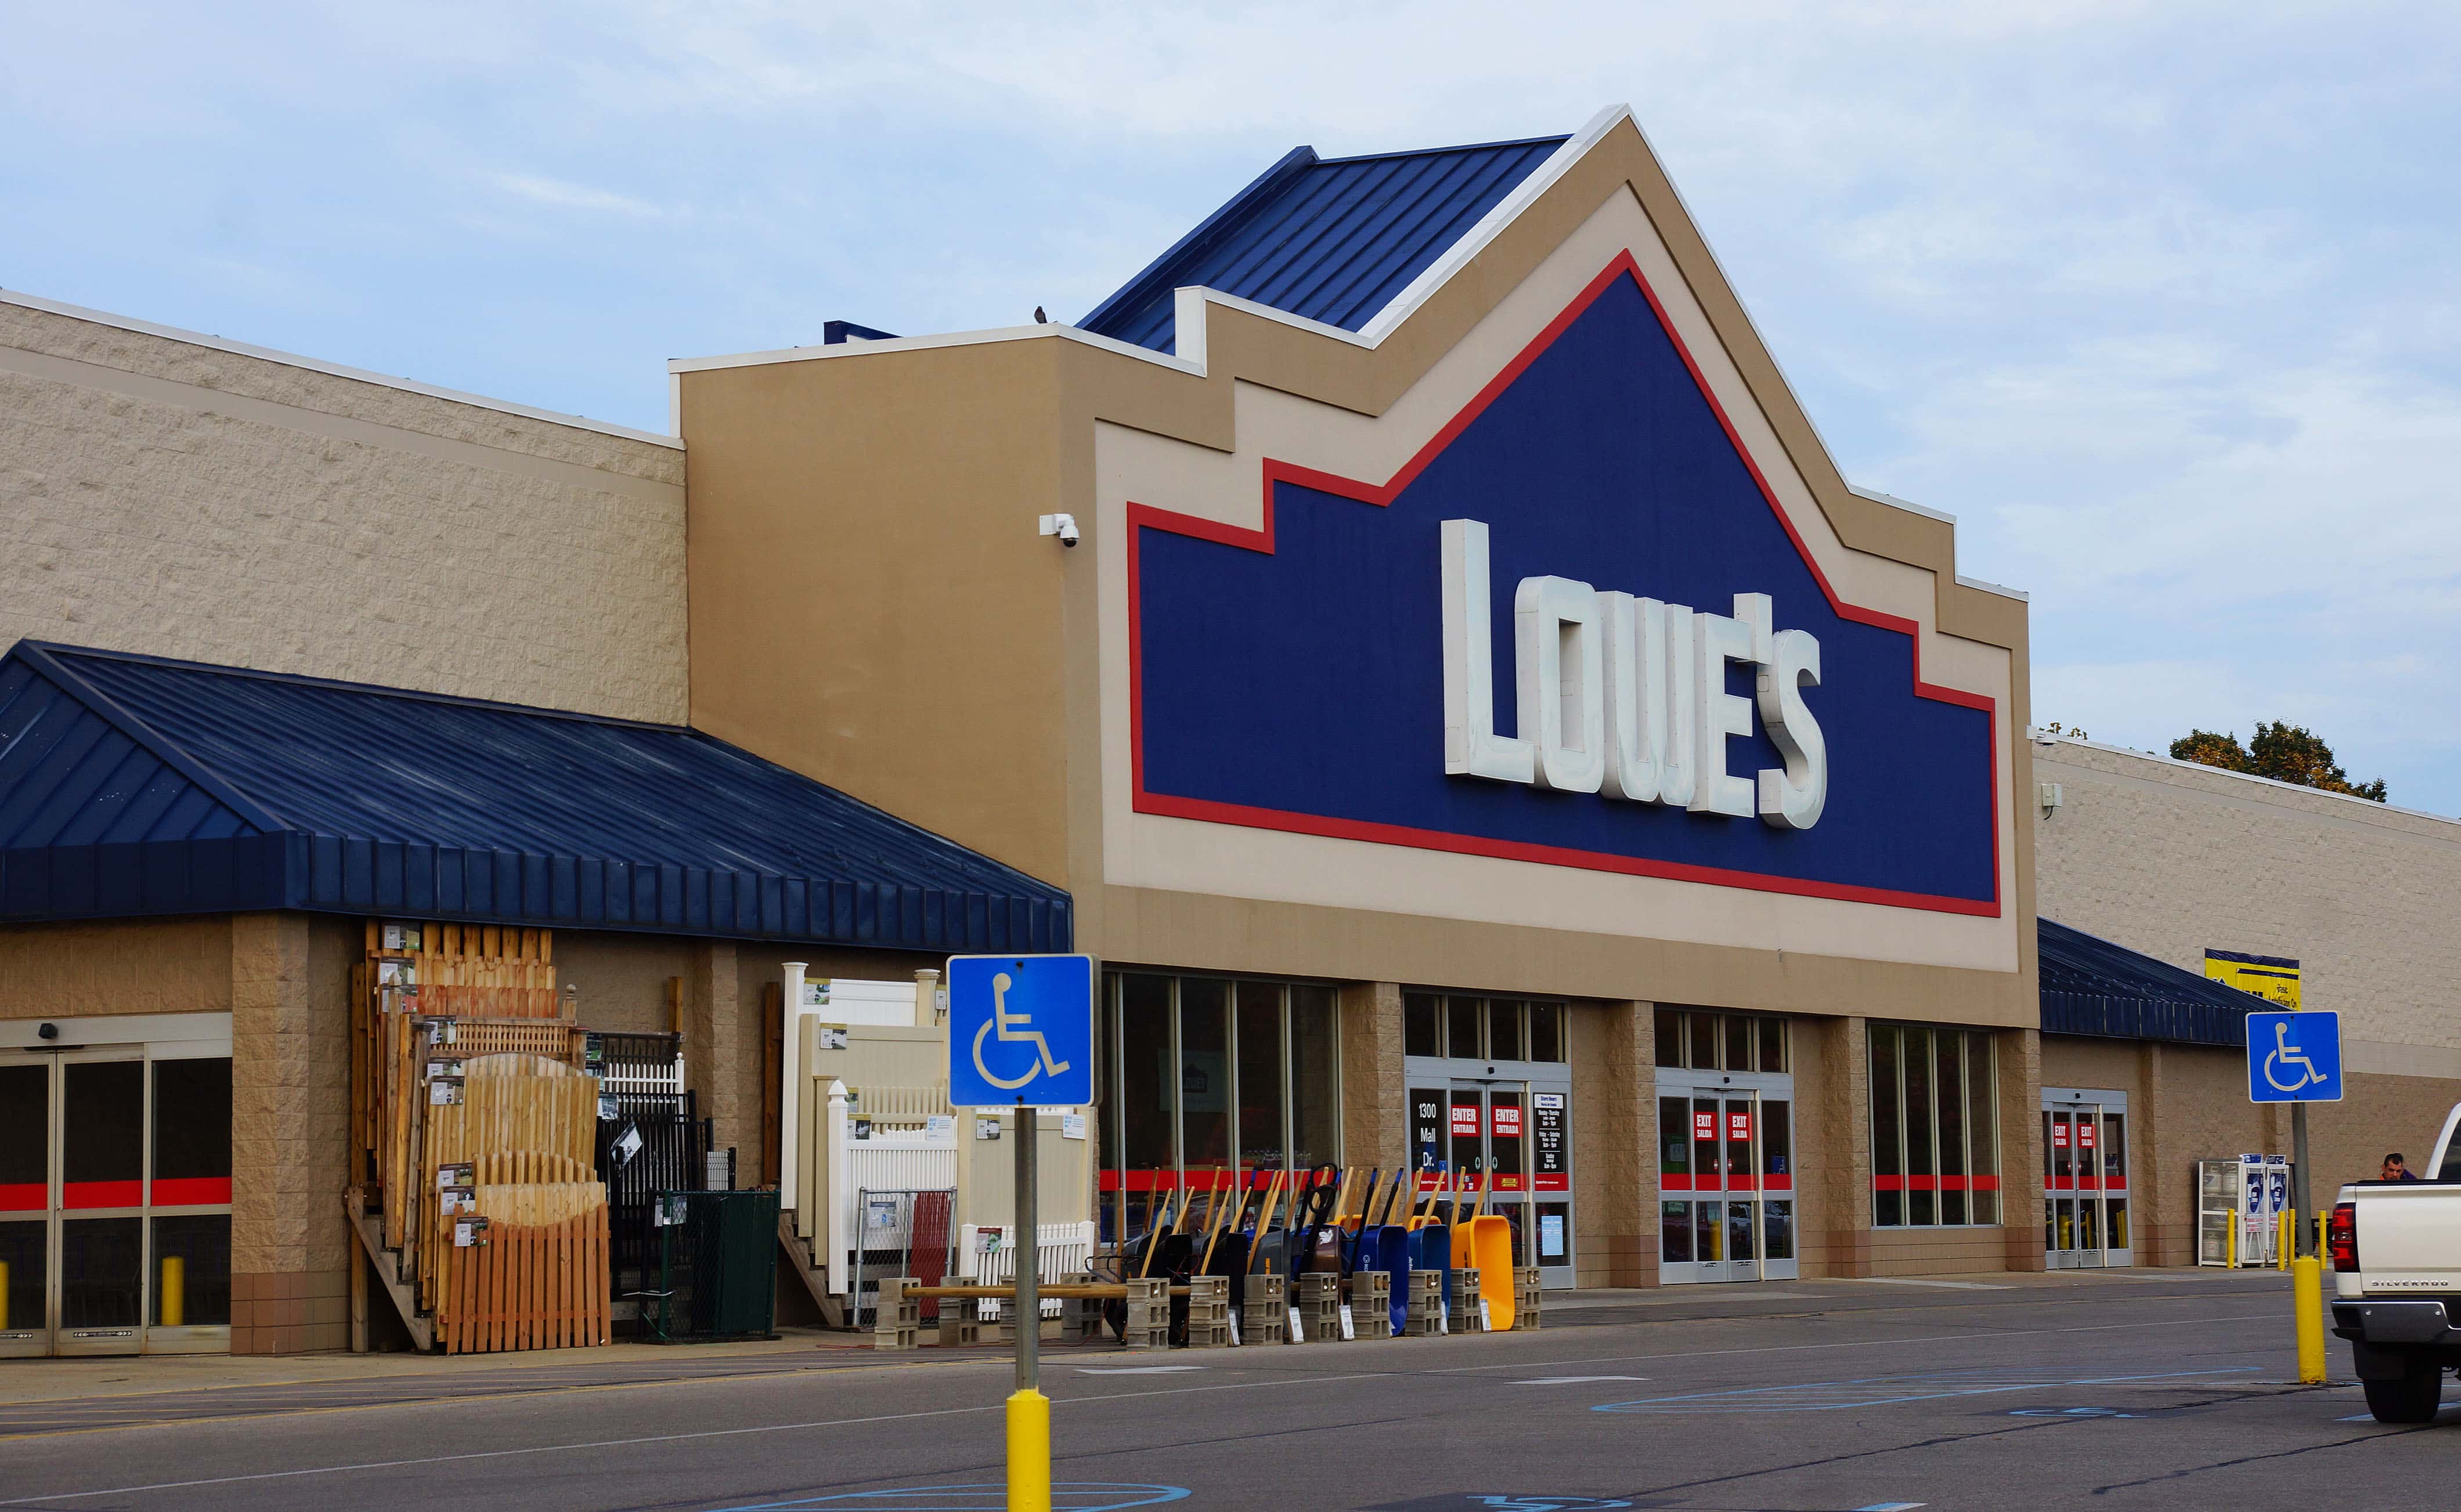 Benton Township Lowes Told to Cease 